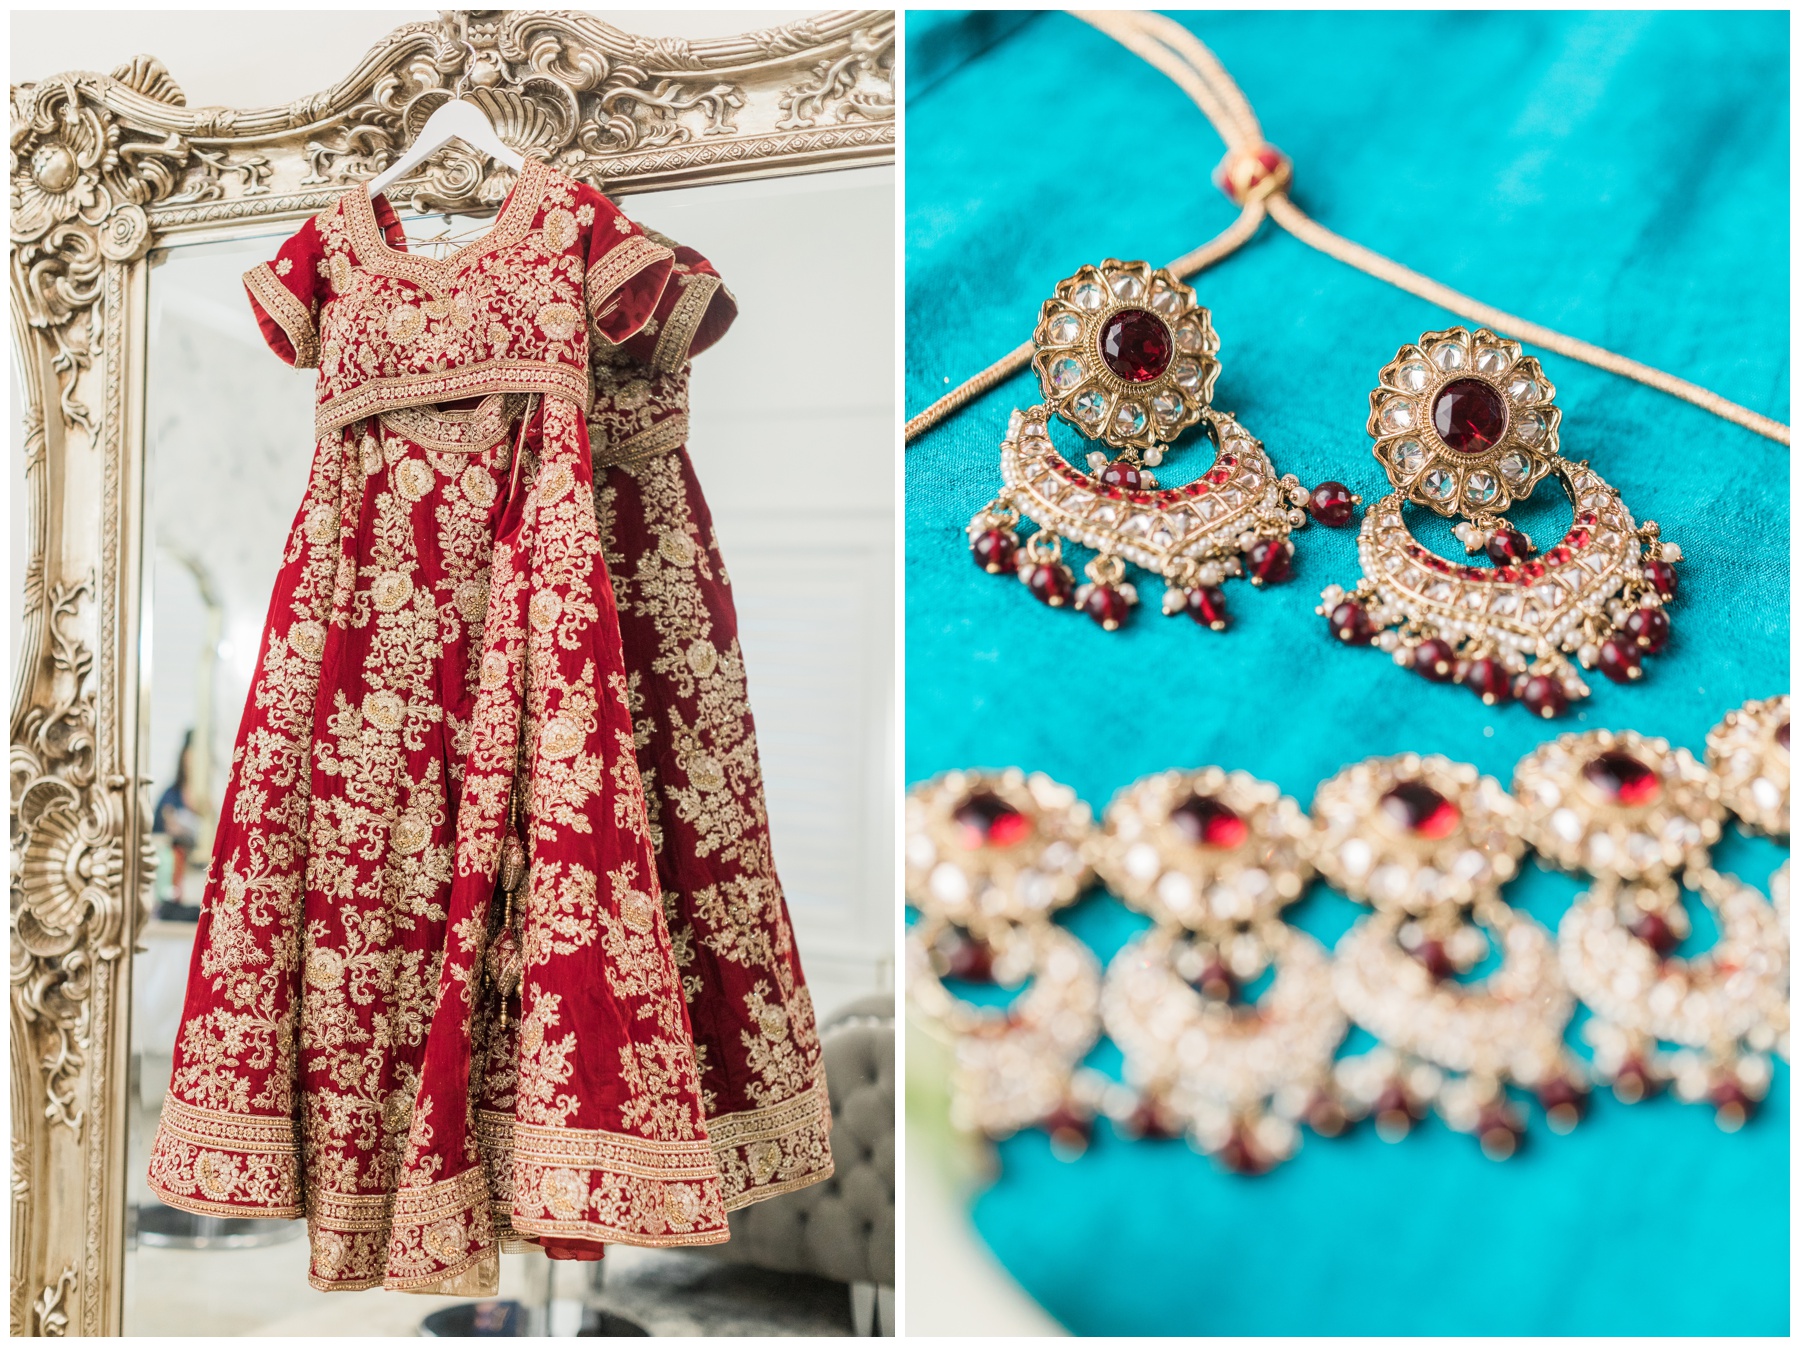 Red Indian wedding dress with gold floral details from Maharani Fashions